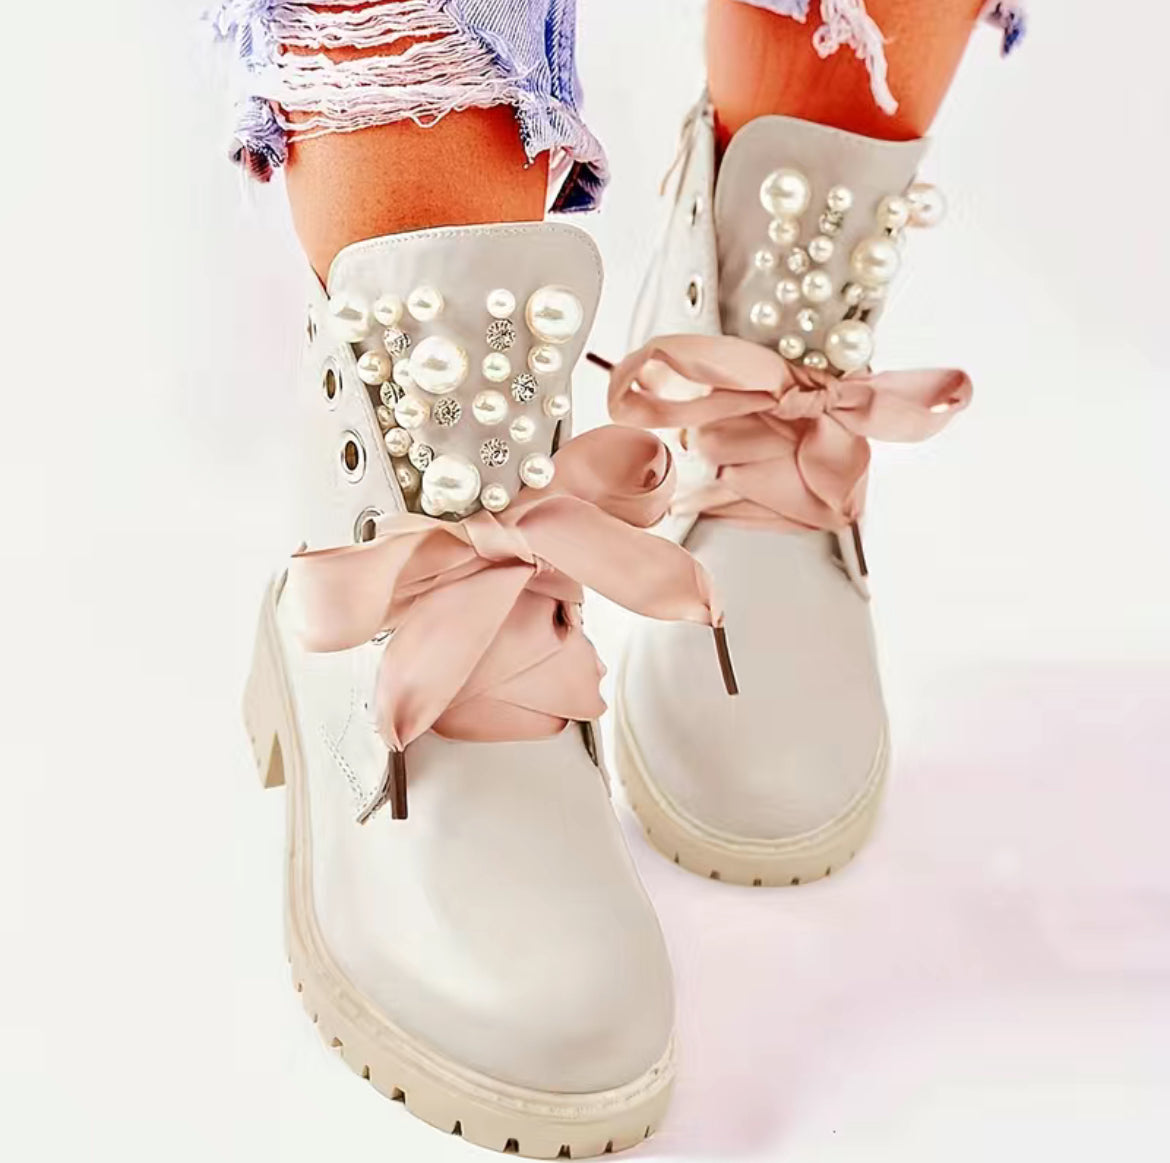 Diamonds & Pearls, Women's Ribbon Lace Up Ankle Boots